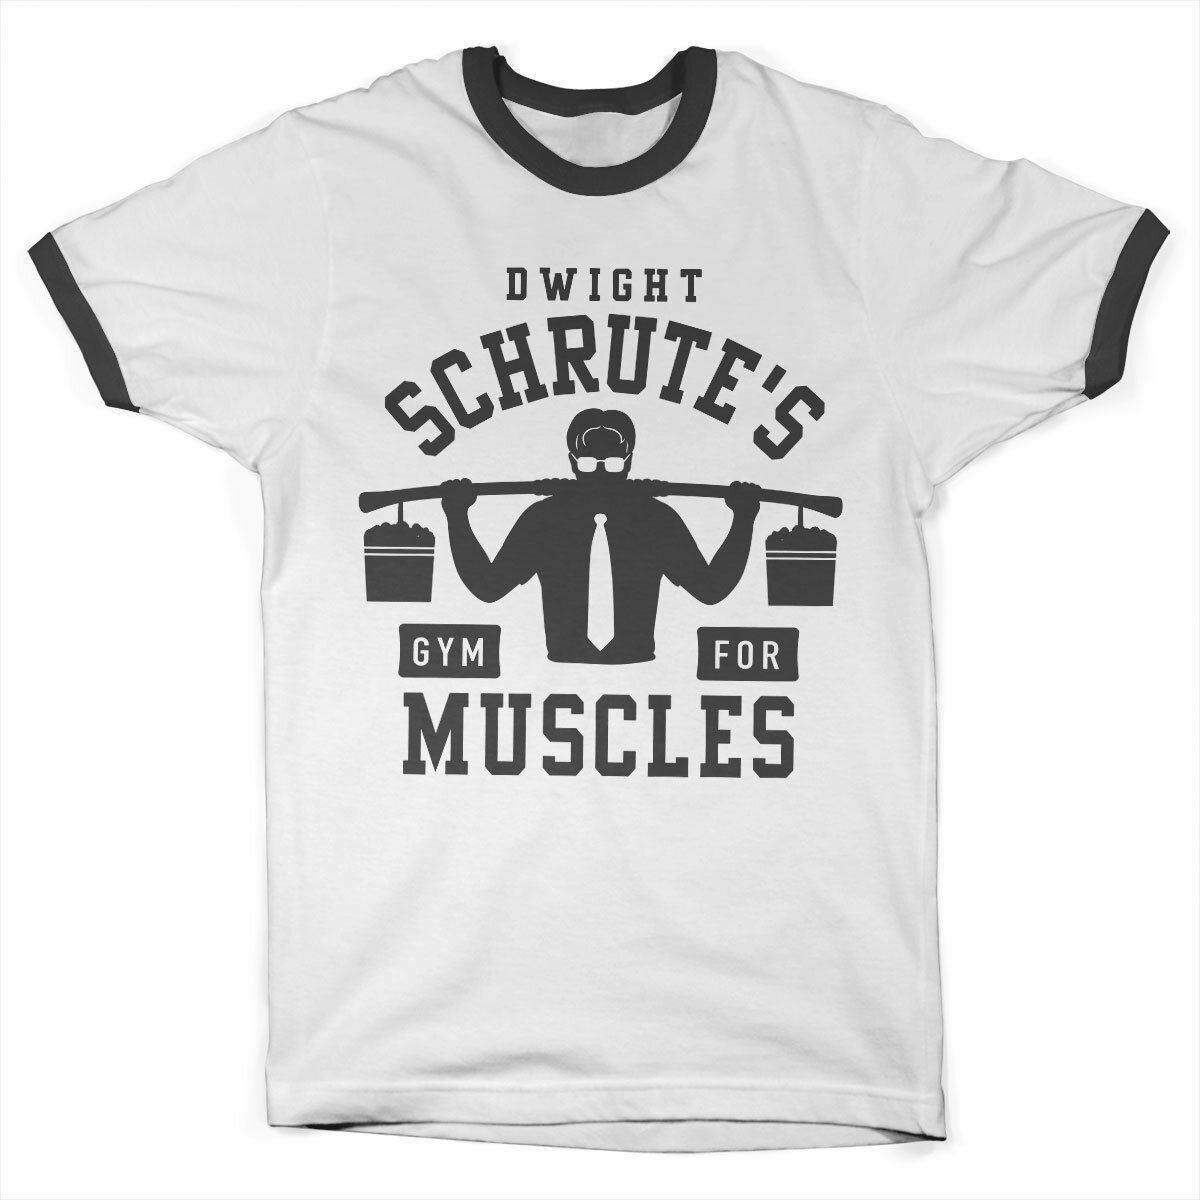 Dwight Schrute's Gym Ringer Tee